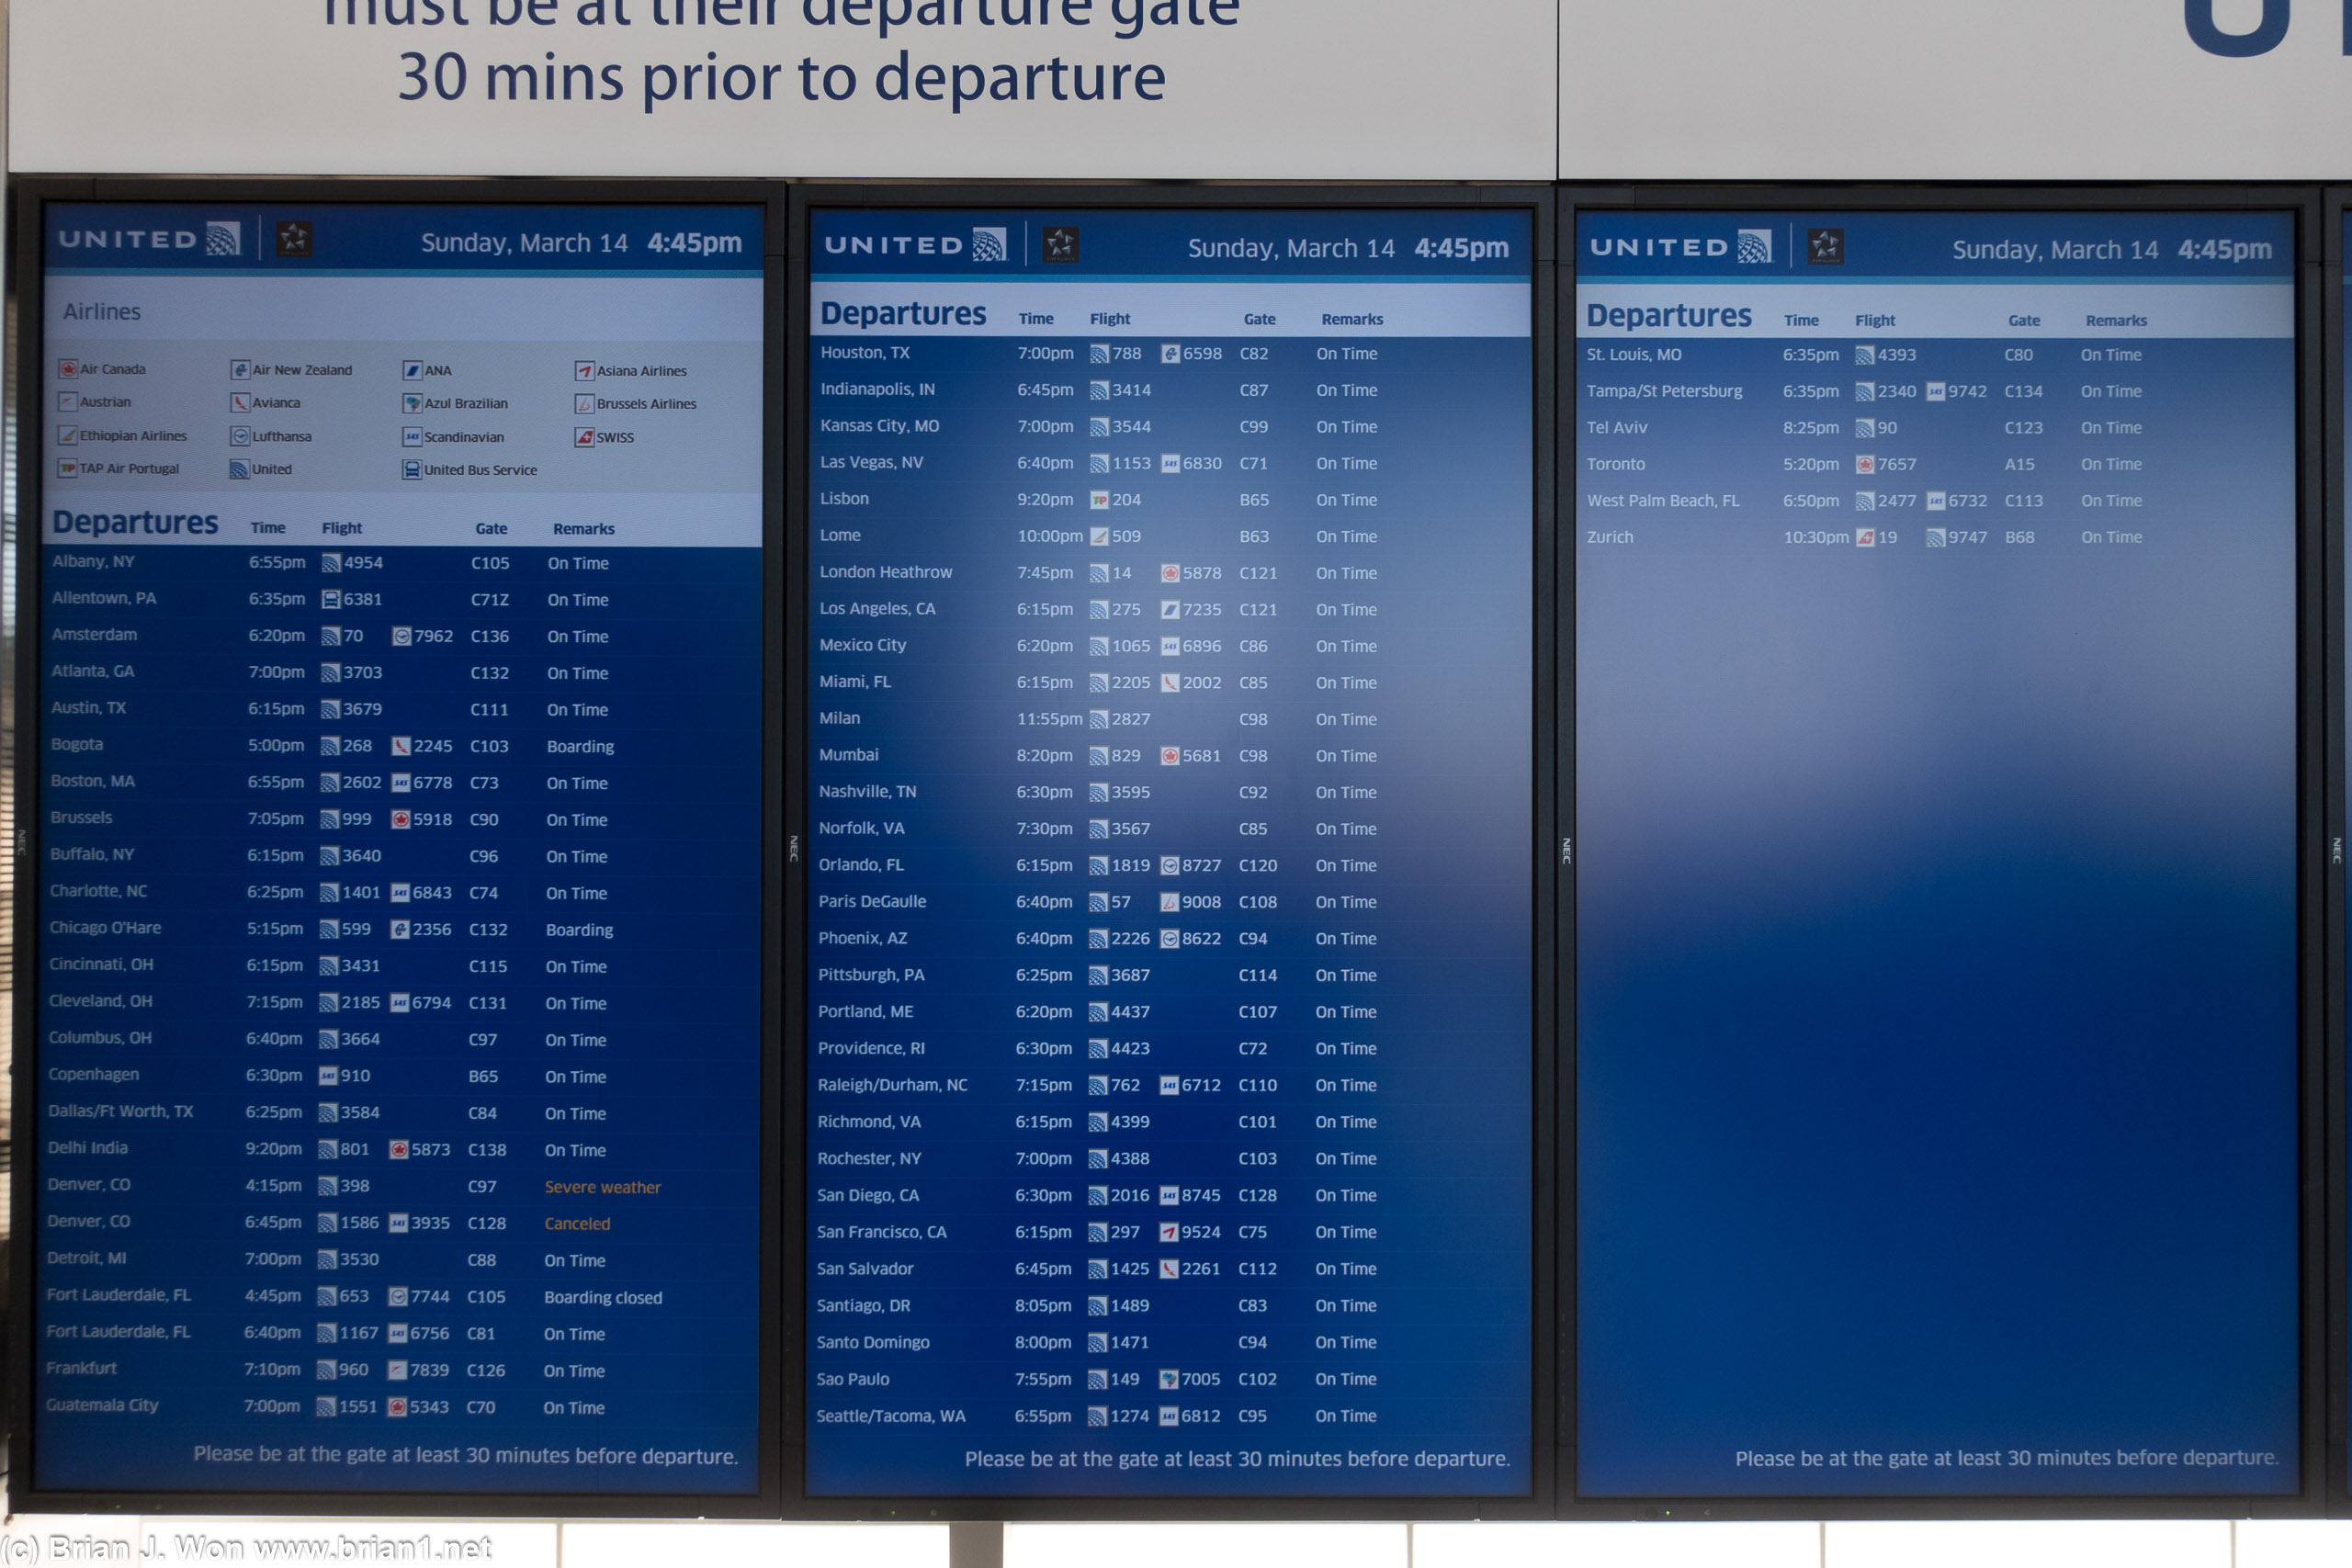 By late afternoon the departures board has trimmed considerably. Still not bad, at least for COVID-19 times.